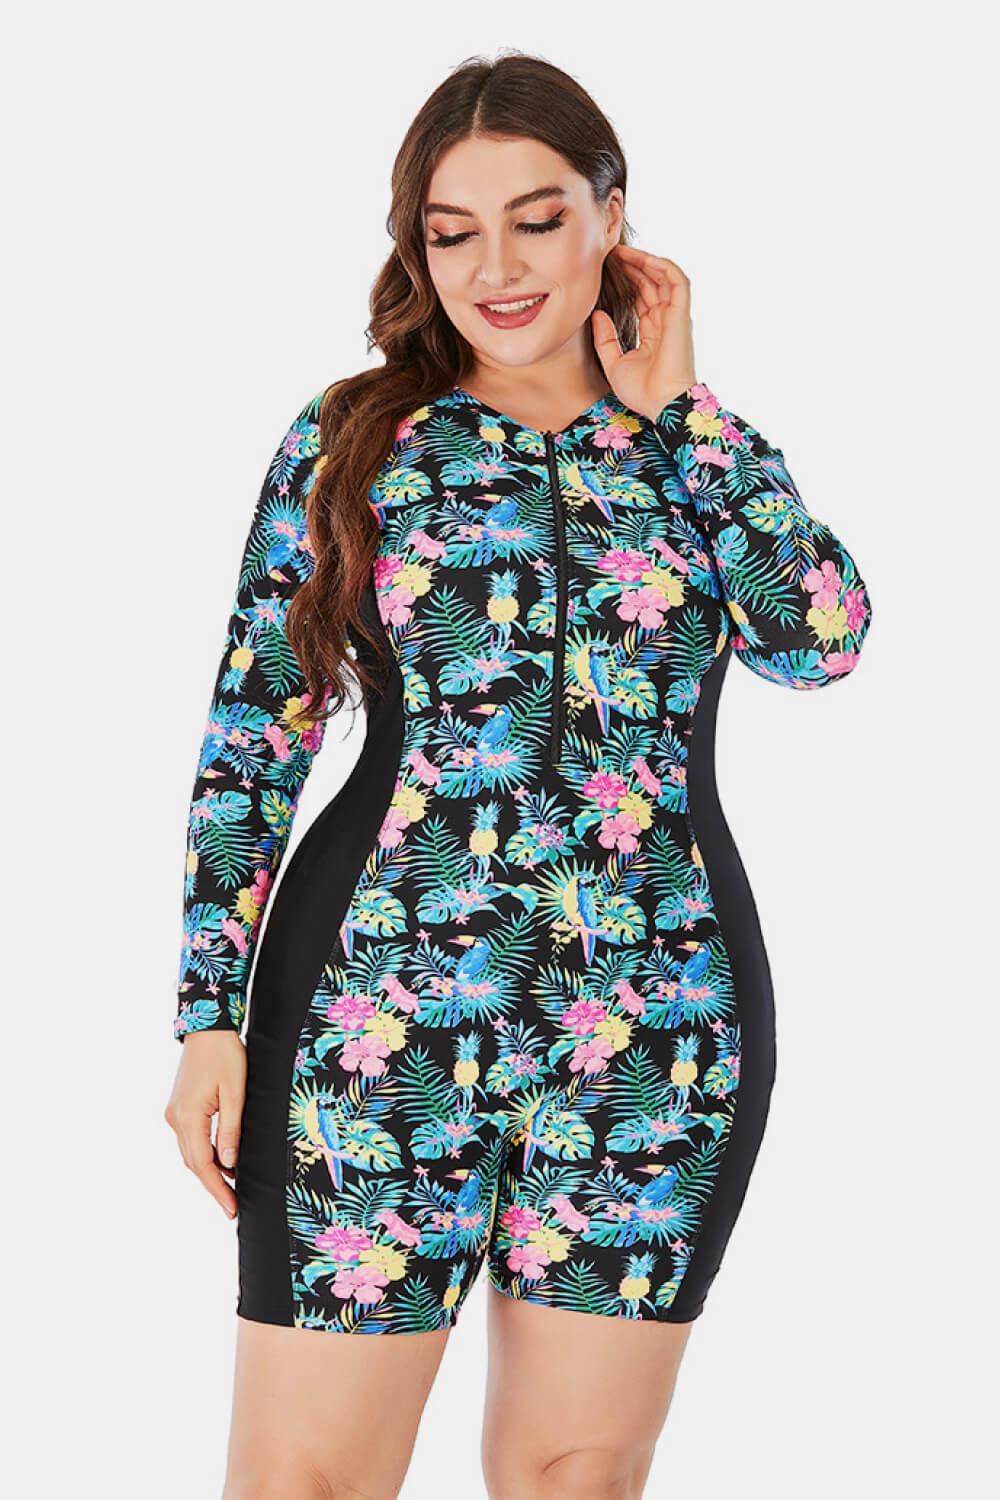 Plus Size Floral Zip Up  Long Sleeve One-Piece Swimsuit BLUE ZONE PLANET